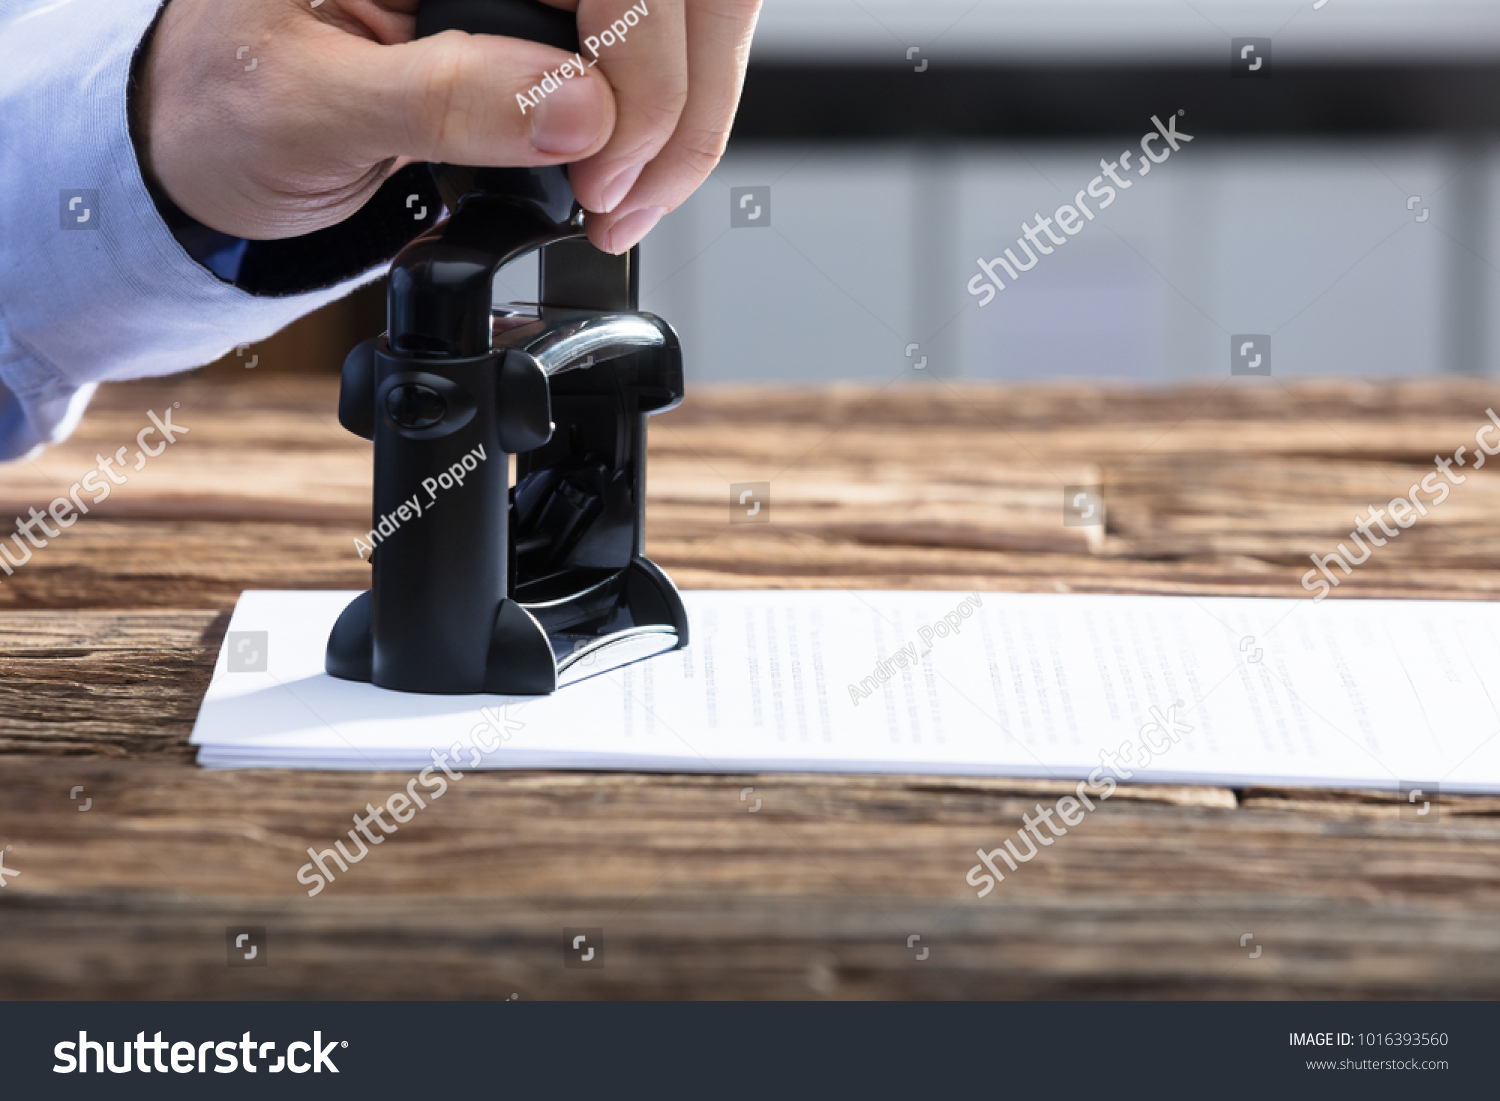 Close-up Of A Businessperson's Hand Stamping With Approved Stamp On Document #1016393560